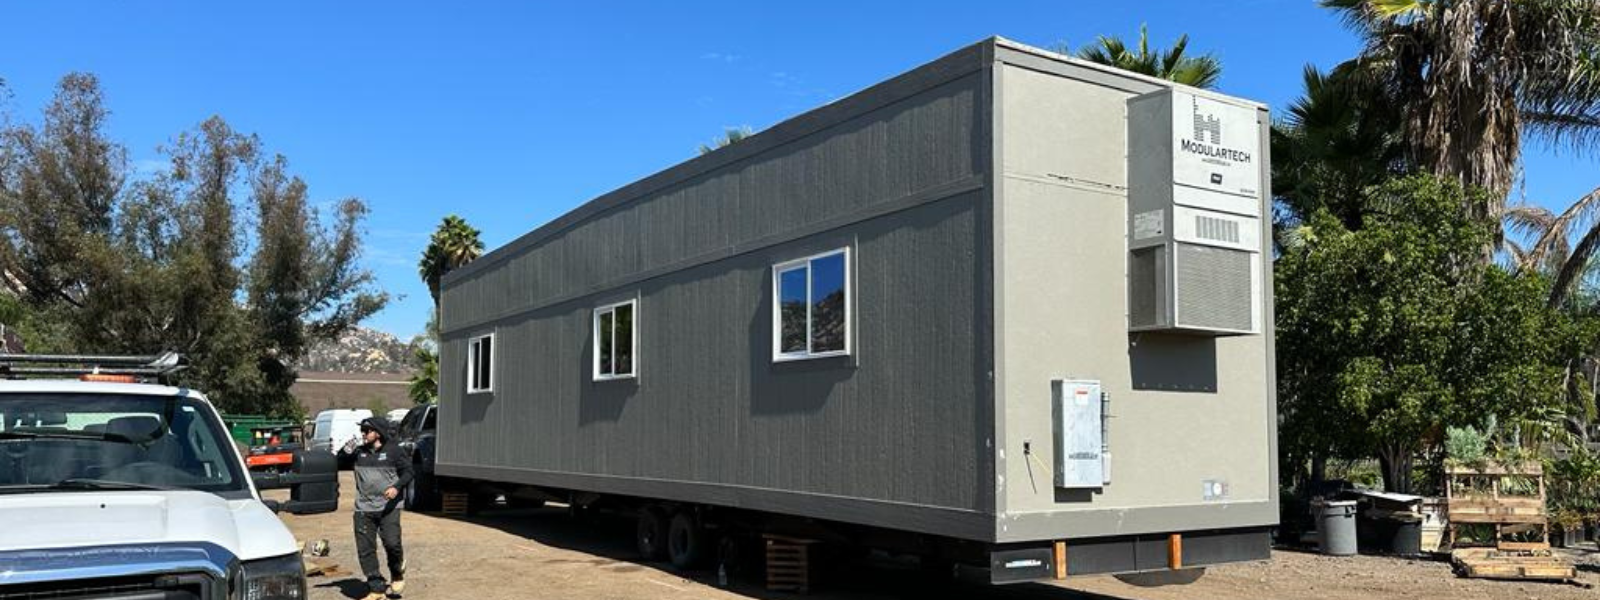 Mobile Office Trailers can be delivered and installed within days of your order.